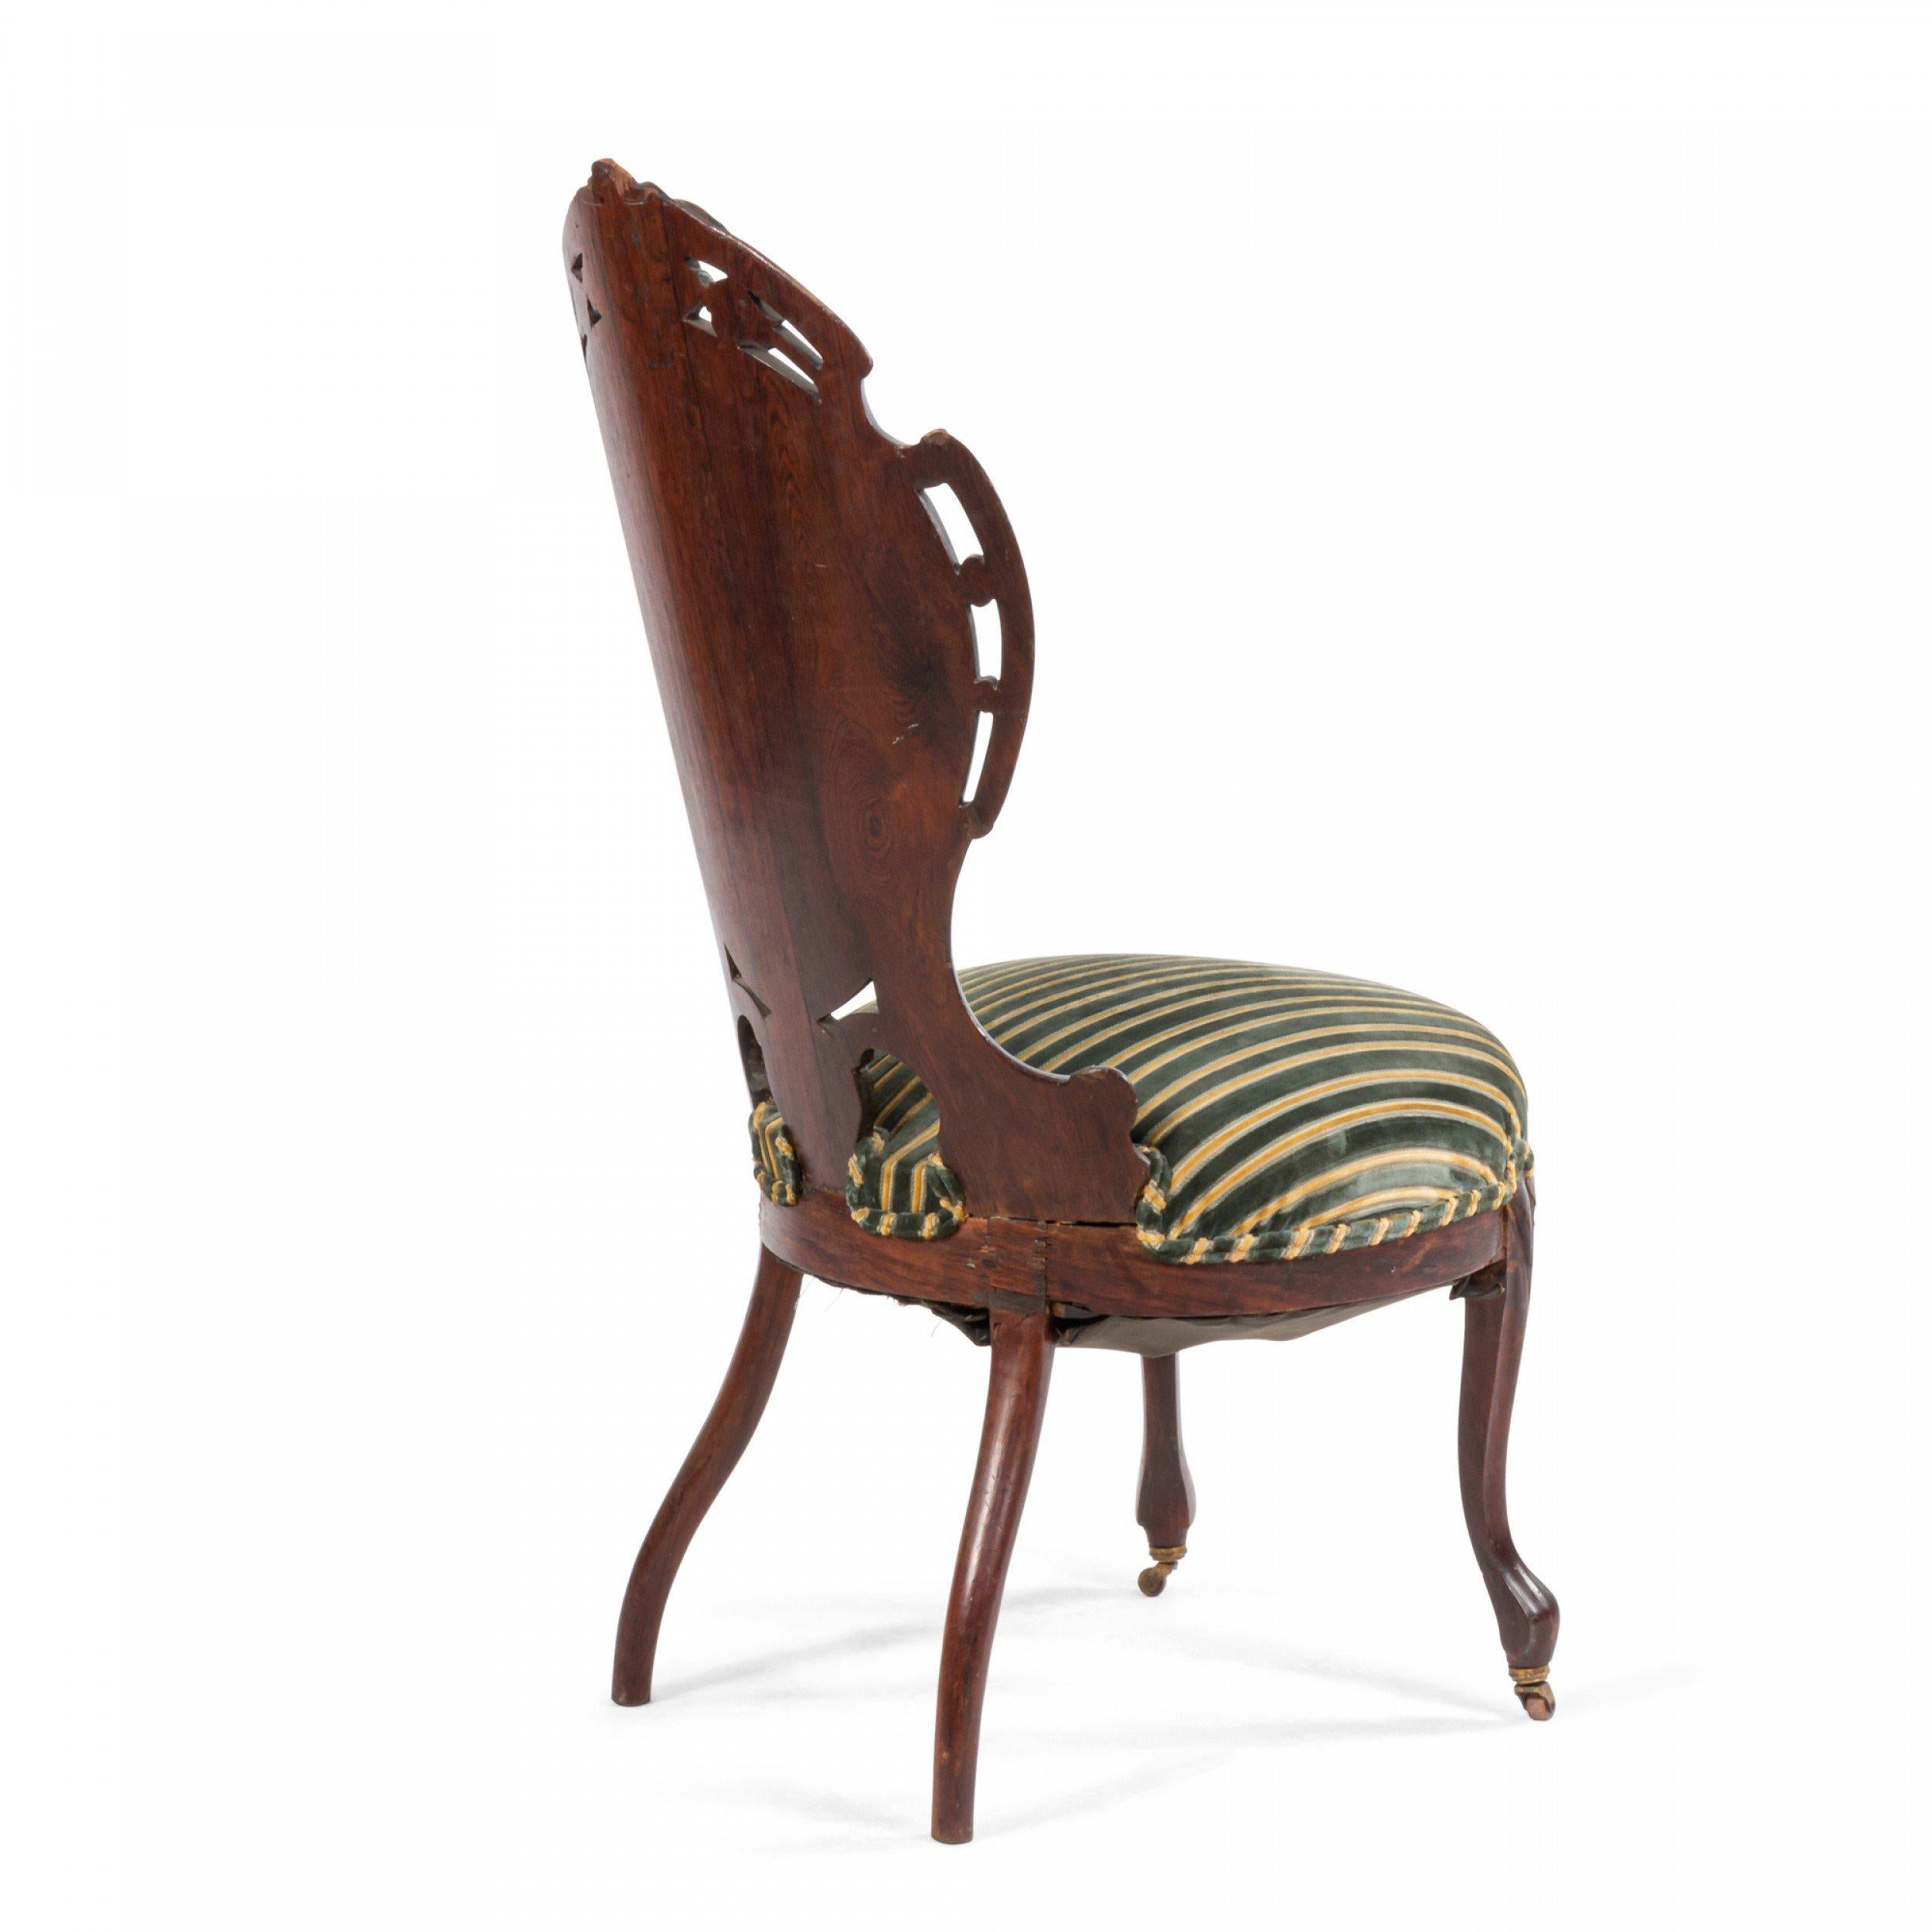 19th Century American Victorian Laminated Striped Side Chair For Sale